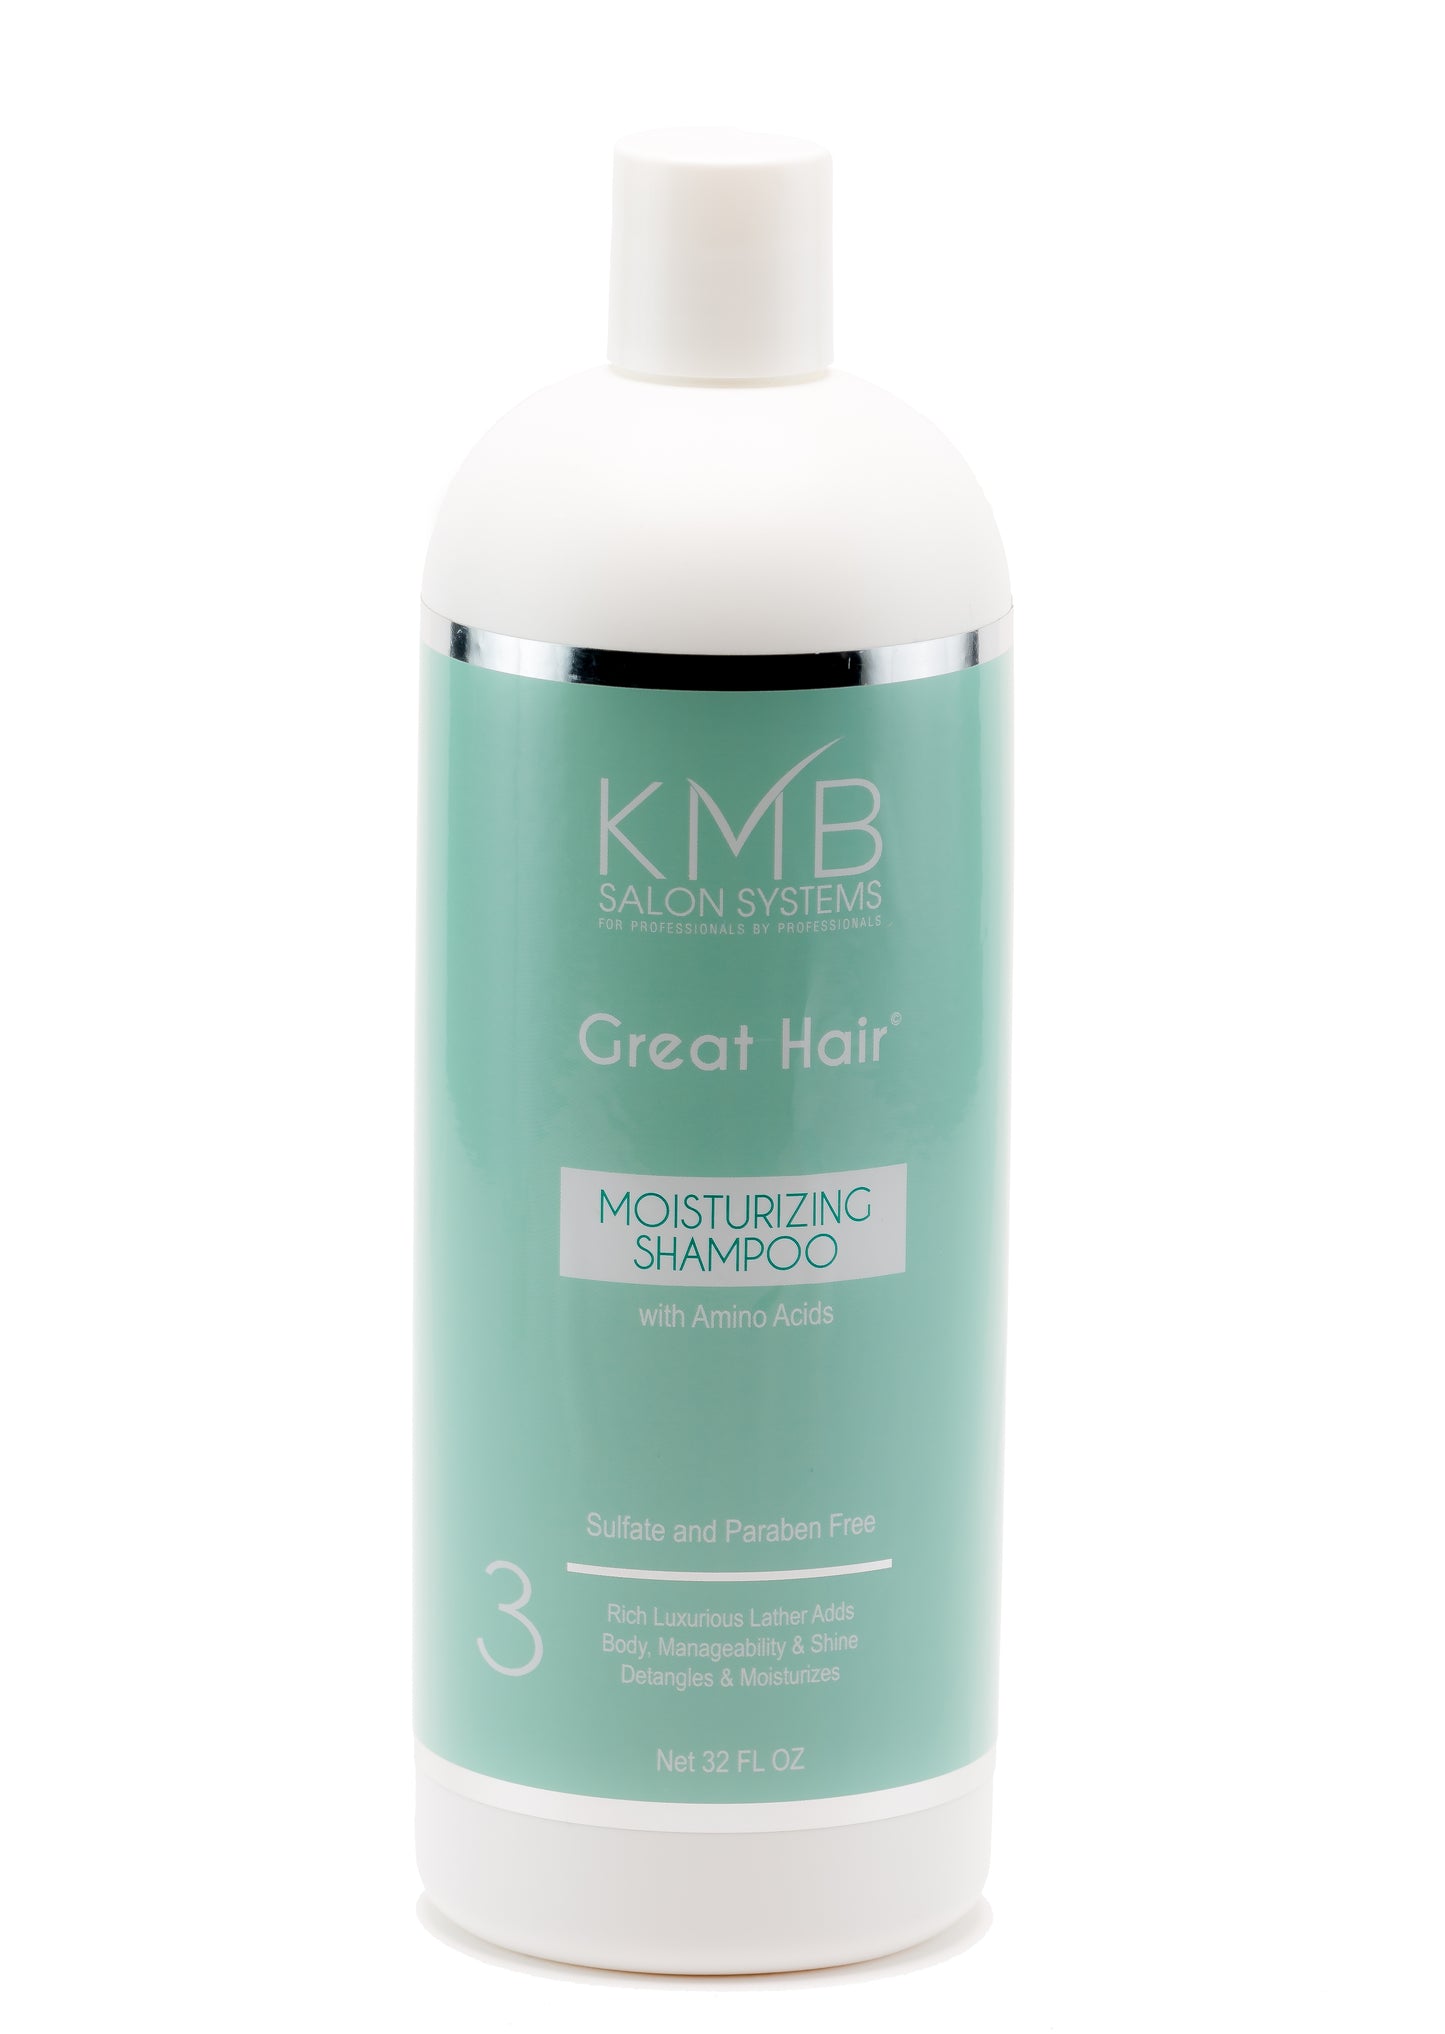 Great Hair Moisturizing Shampoo is paraben free and replenishes moisture to the hair and provides softening agents for manageability.